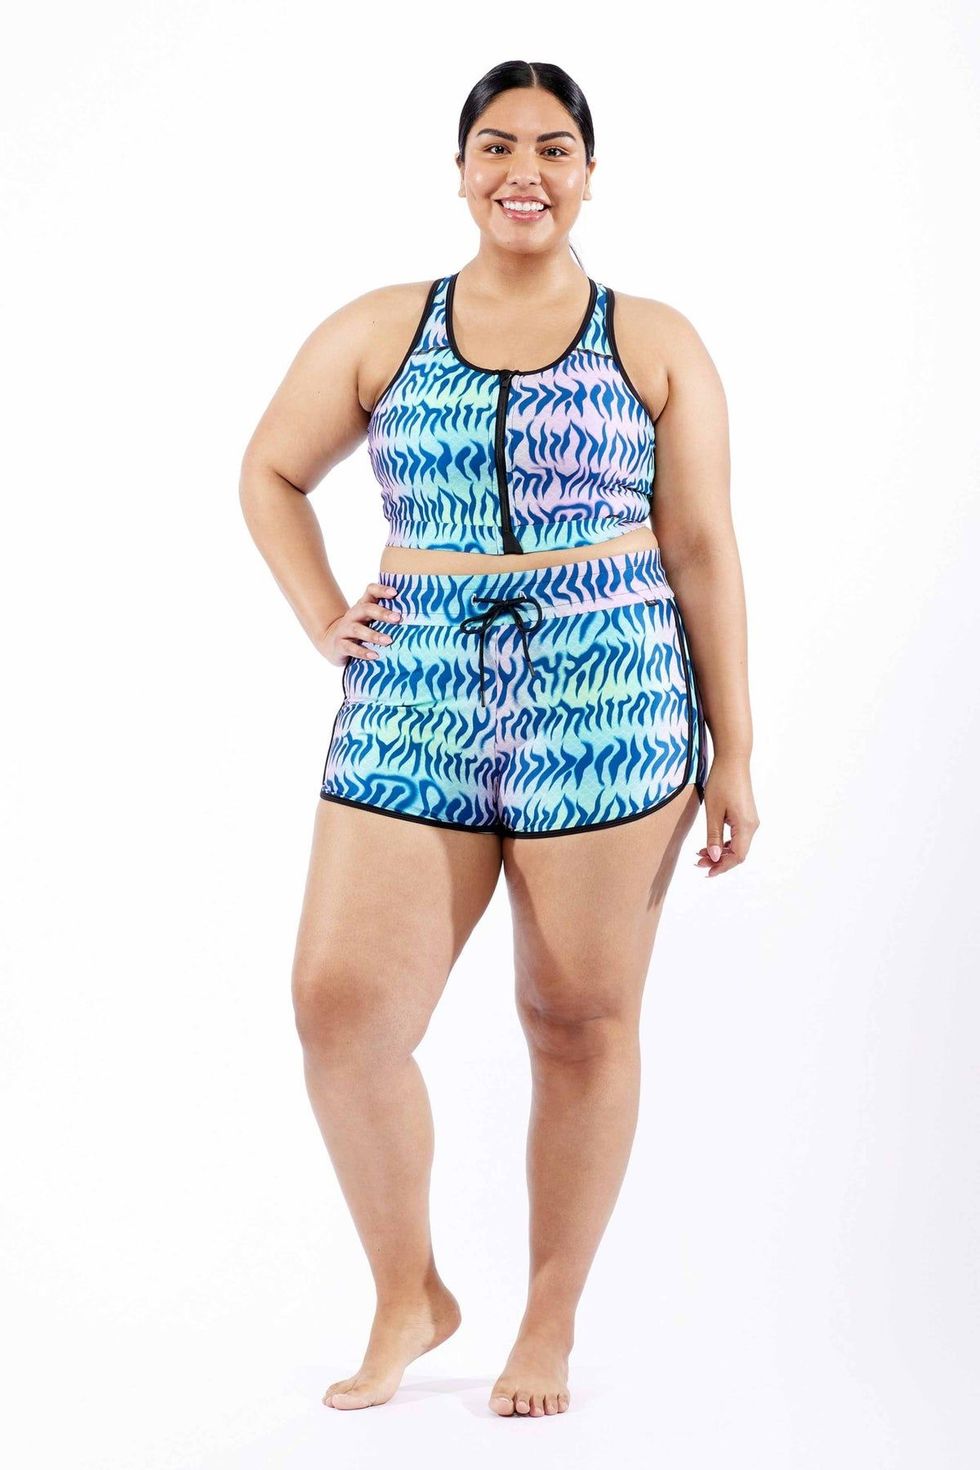 18 Best Gender Neutral and Non-Binary Swimsuit Brands to Shop